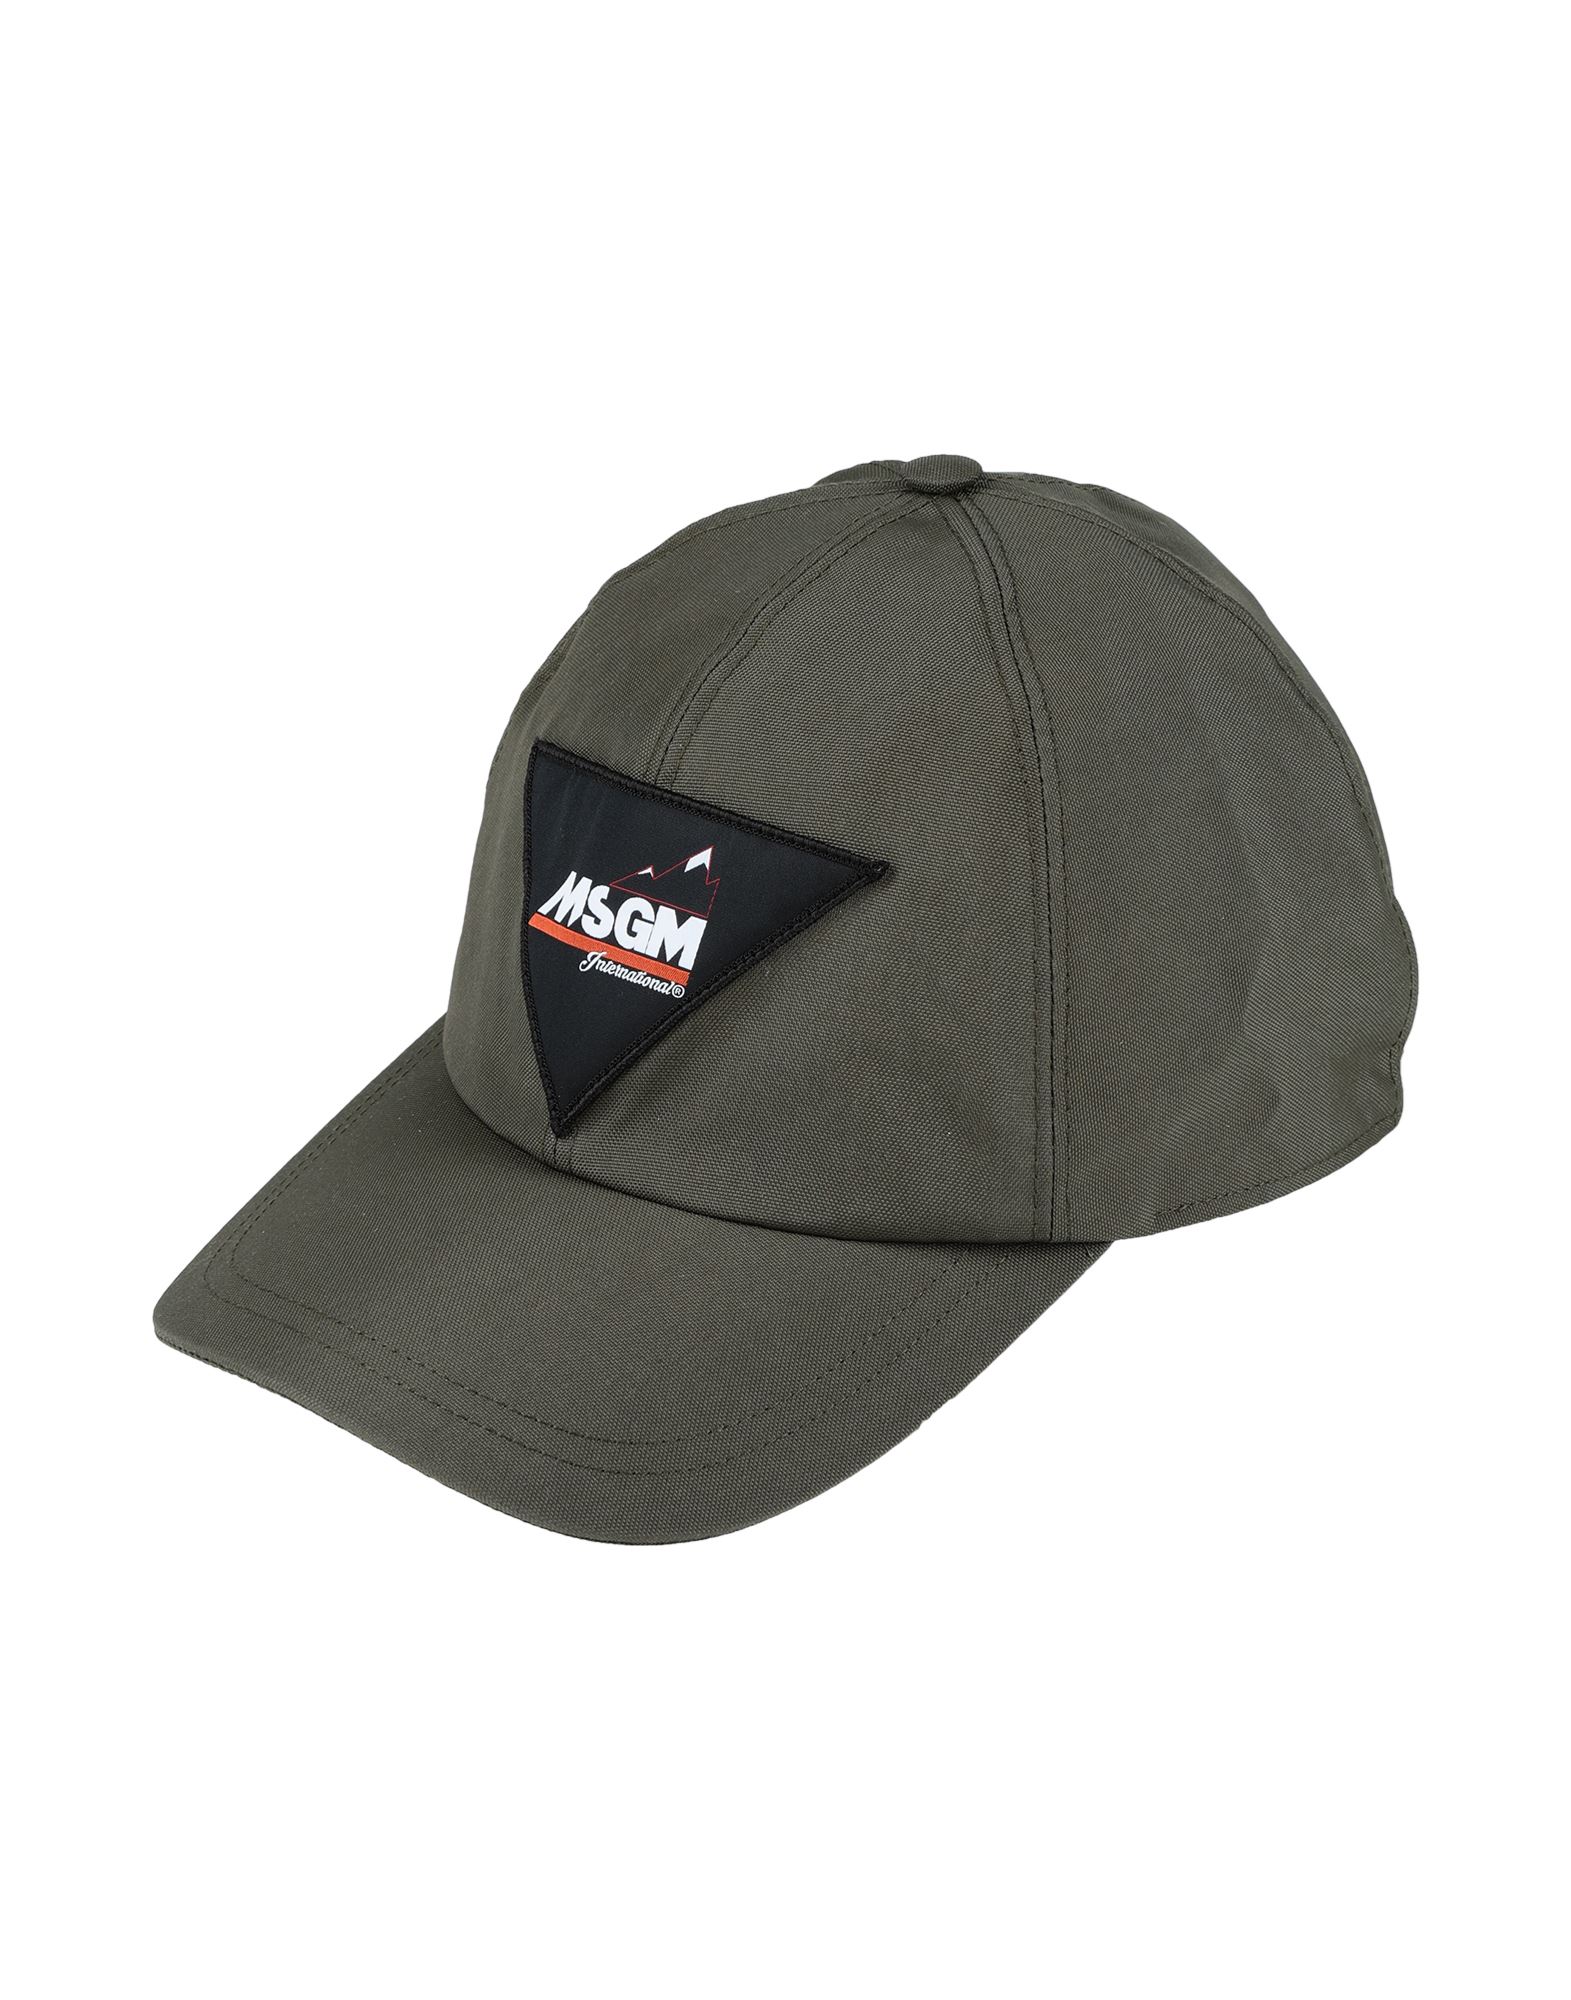 Msgm Hats In Military Green